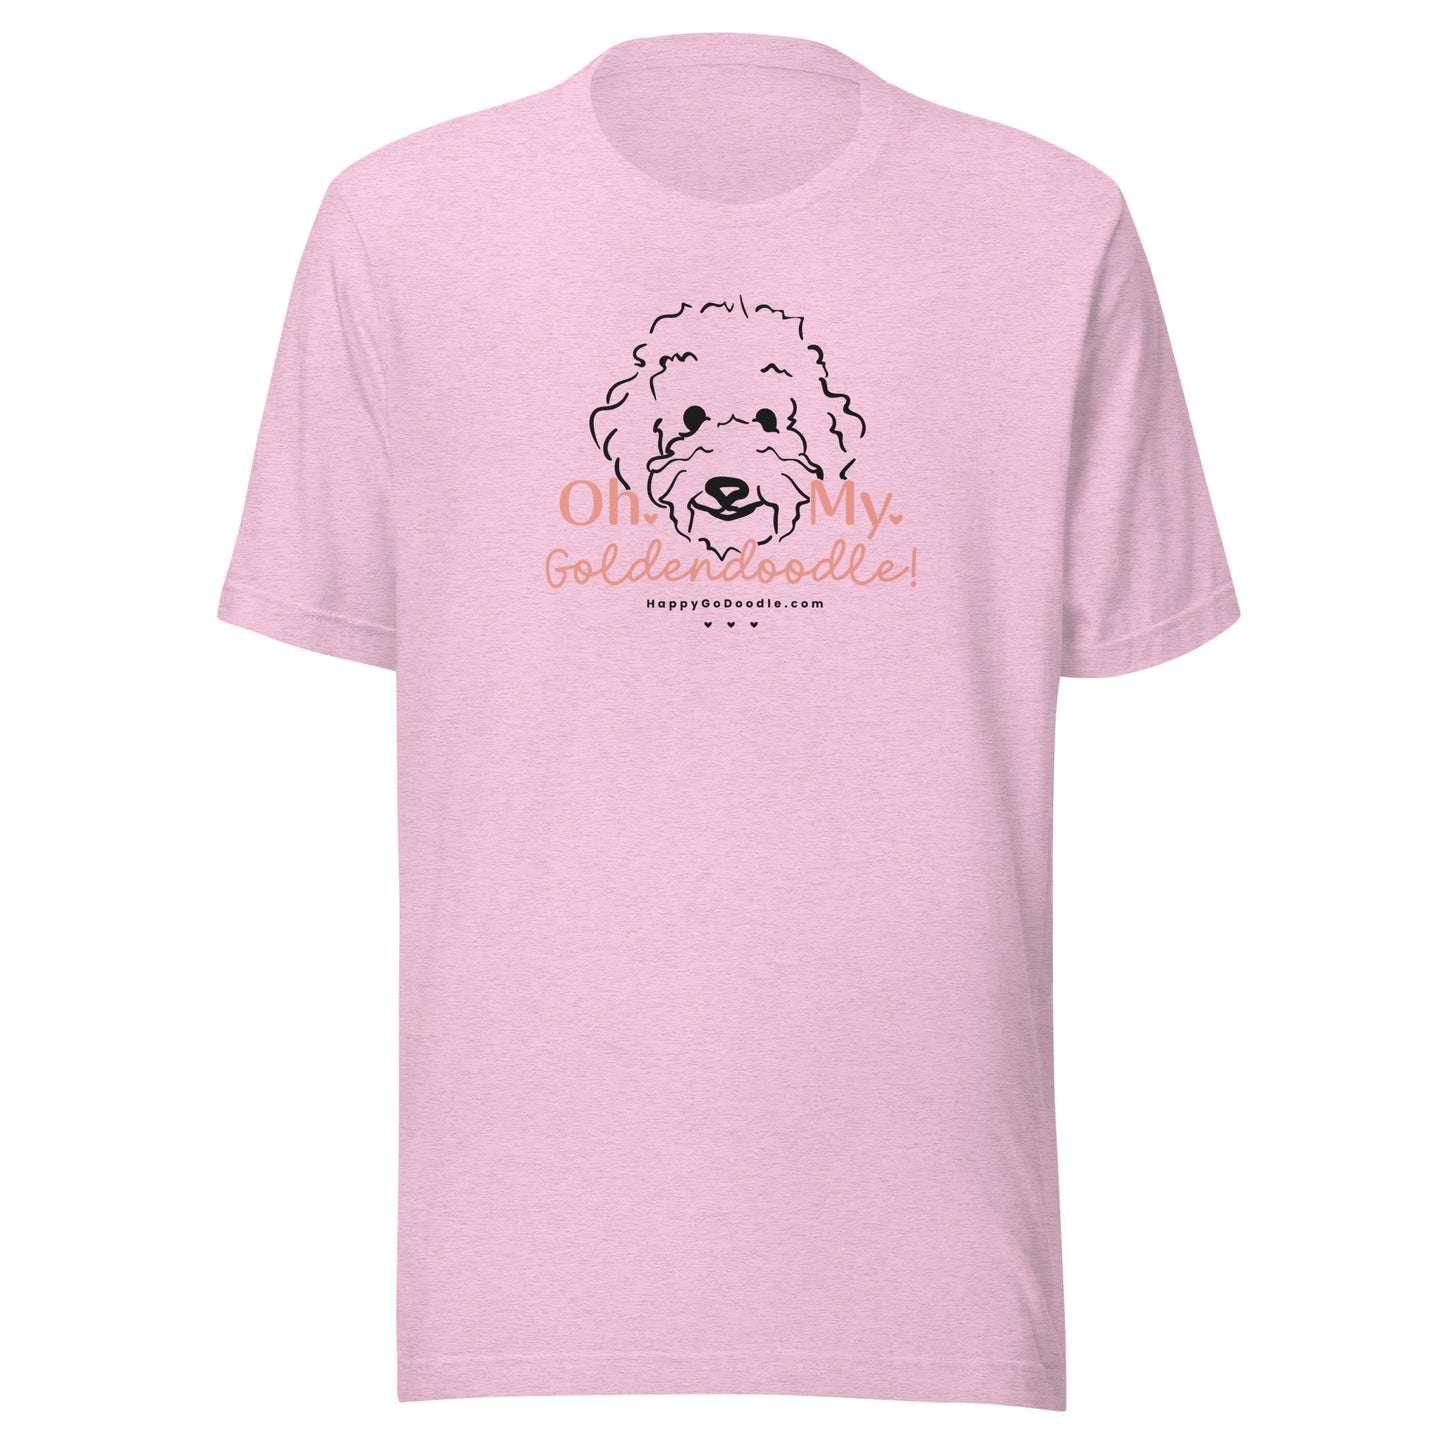 Goldendoodle t-shirt with Goldendoodle dog face and words "Oh My Goldendoodle" in light pink color